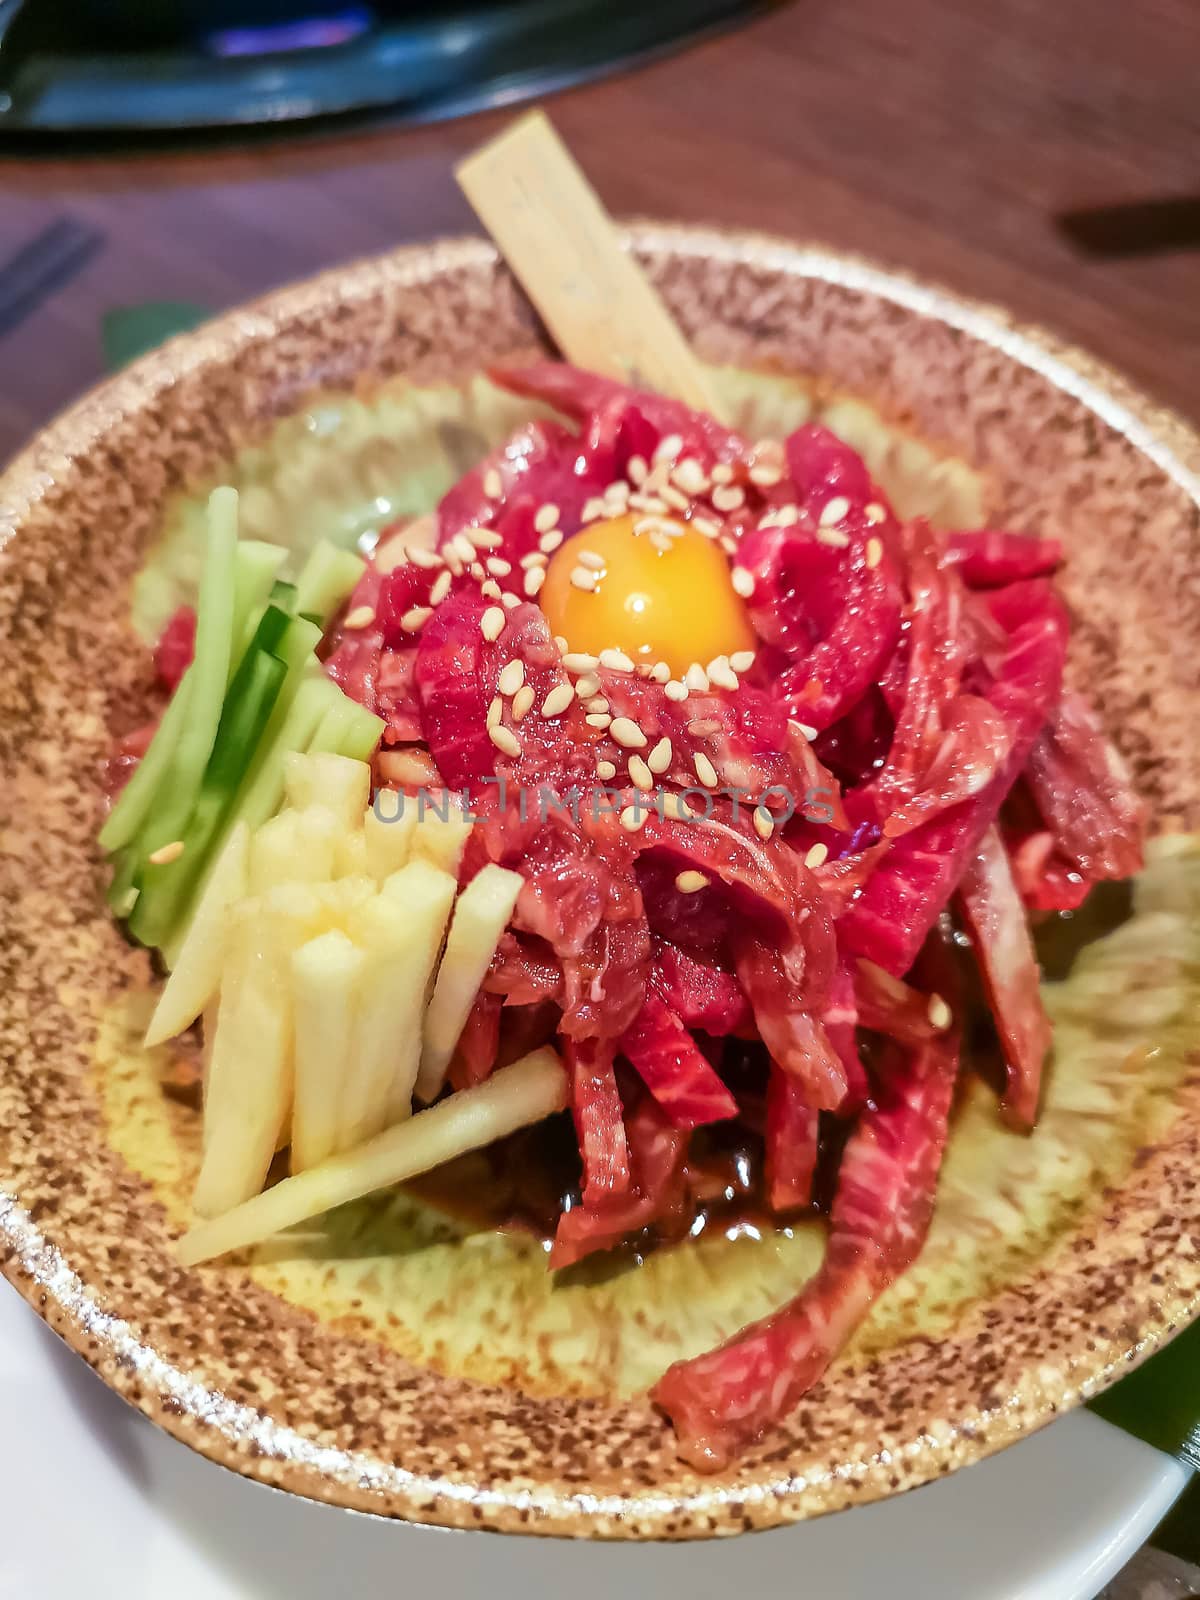 Okinawa style local beef dish in Naha by f11photo